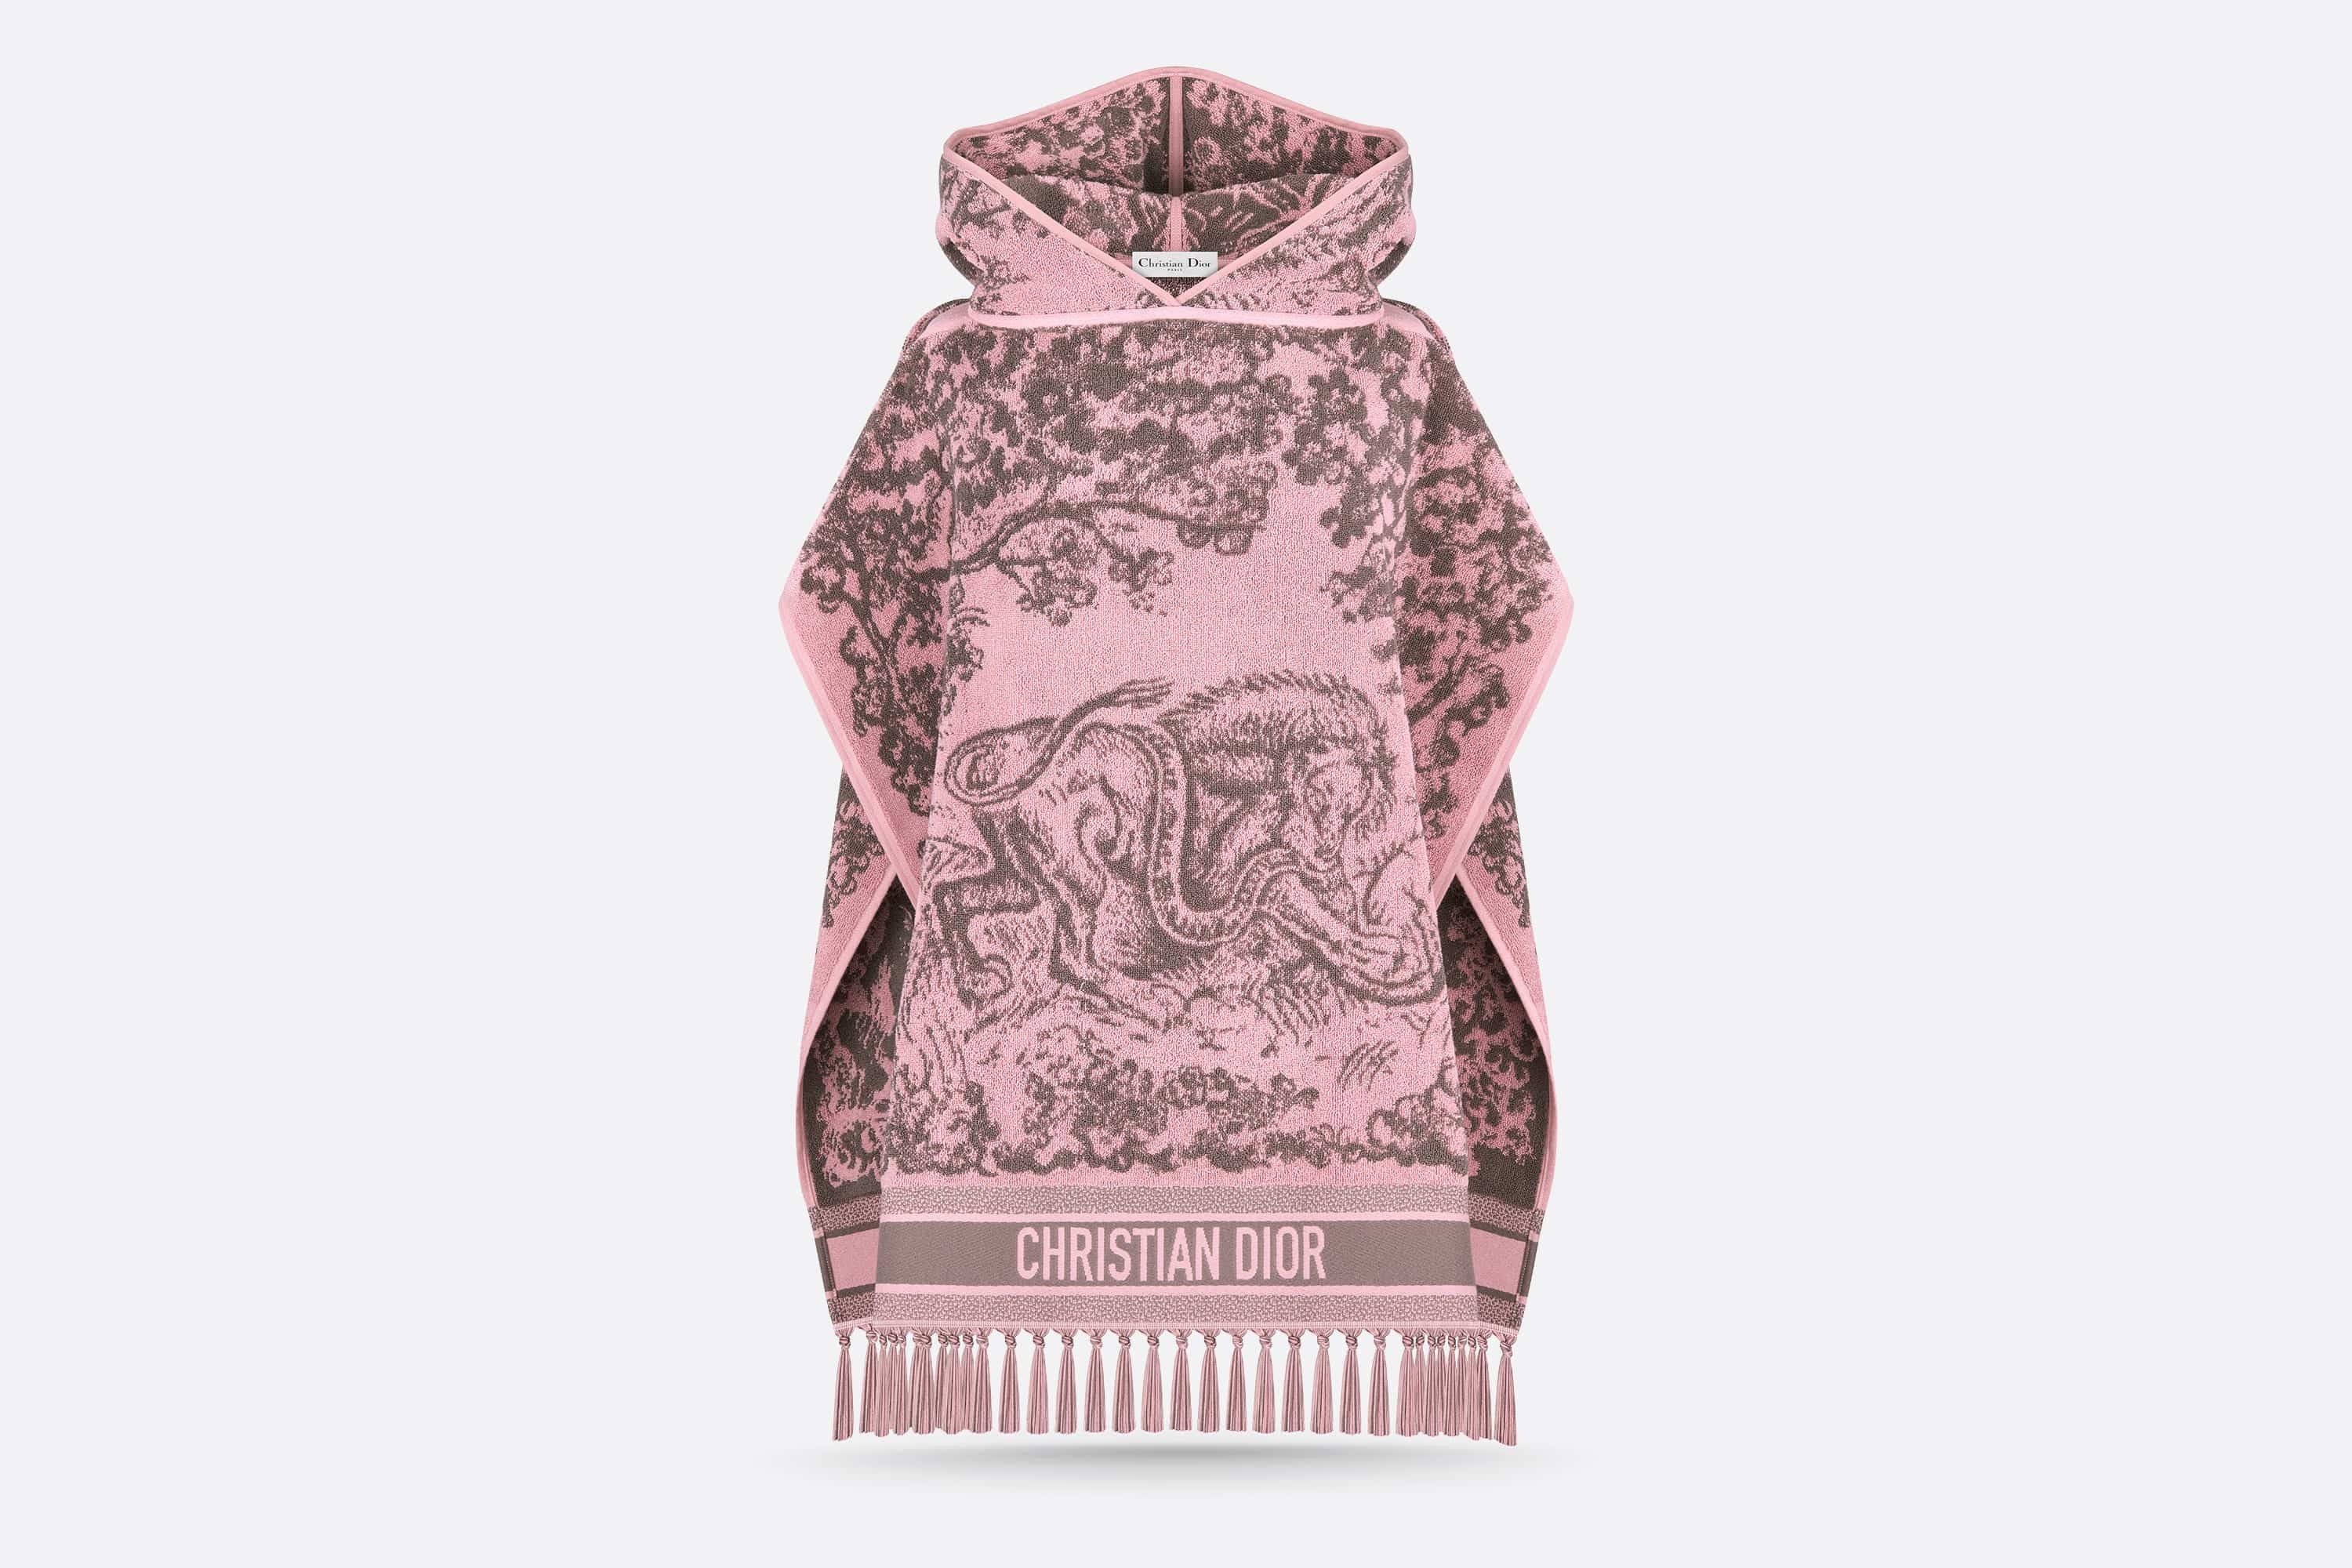 Toile de Jouy Sauvage Hooded Poncho - 1